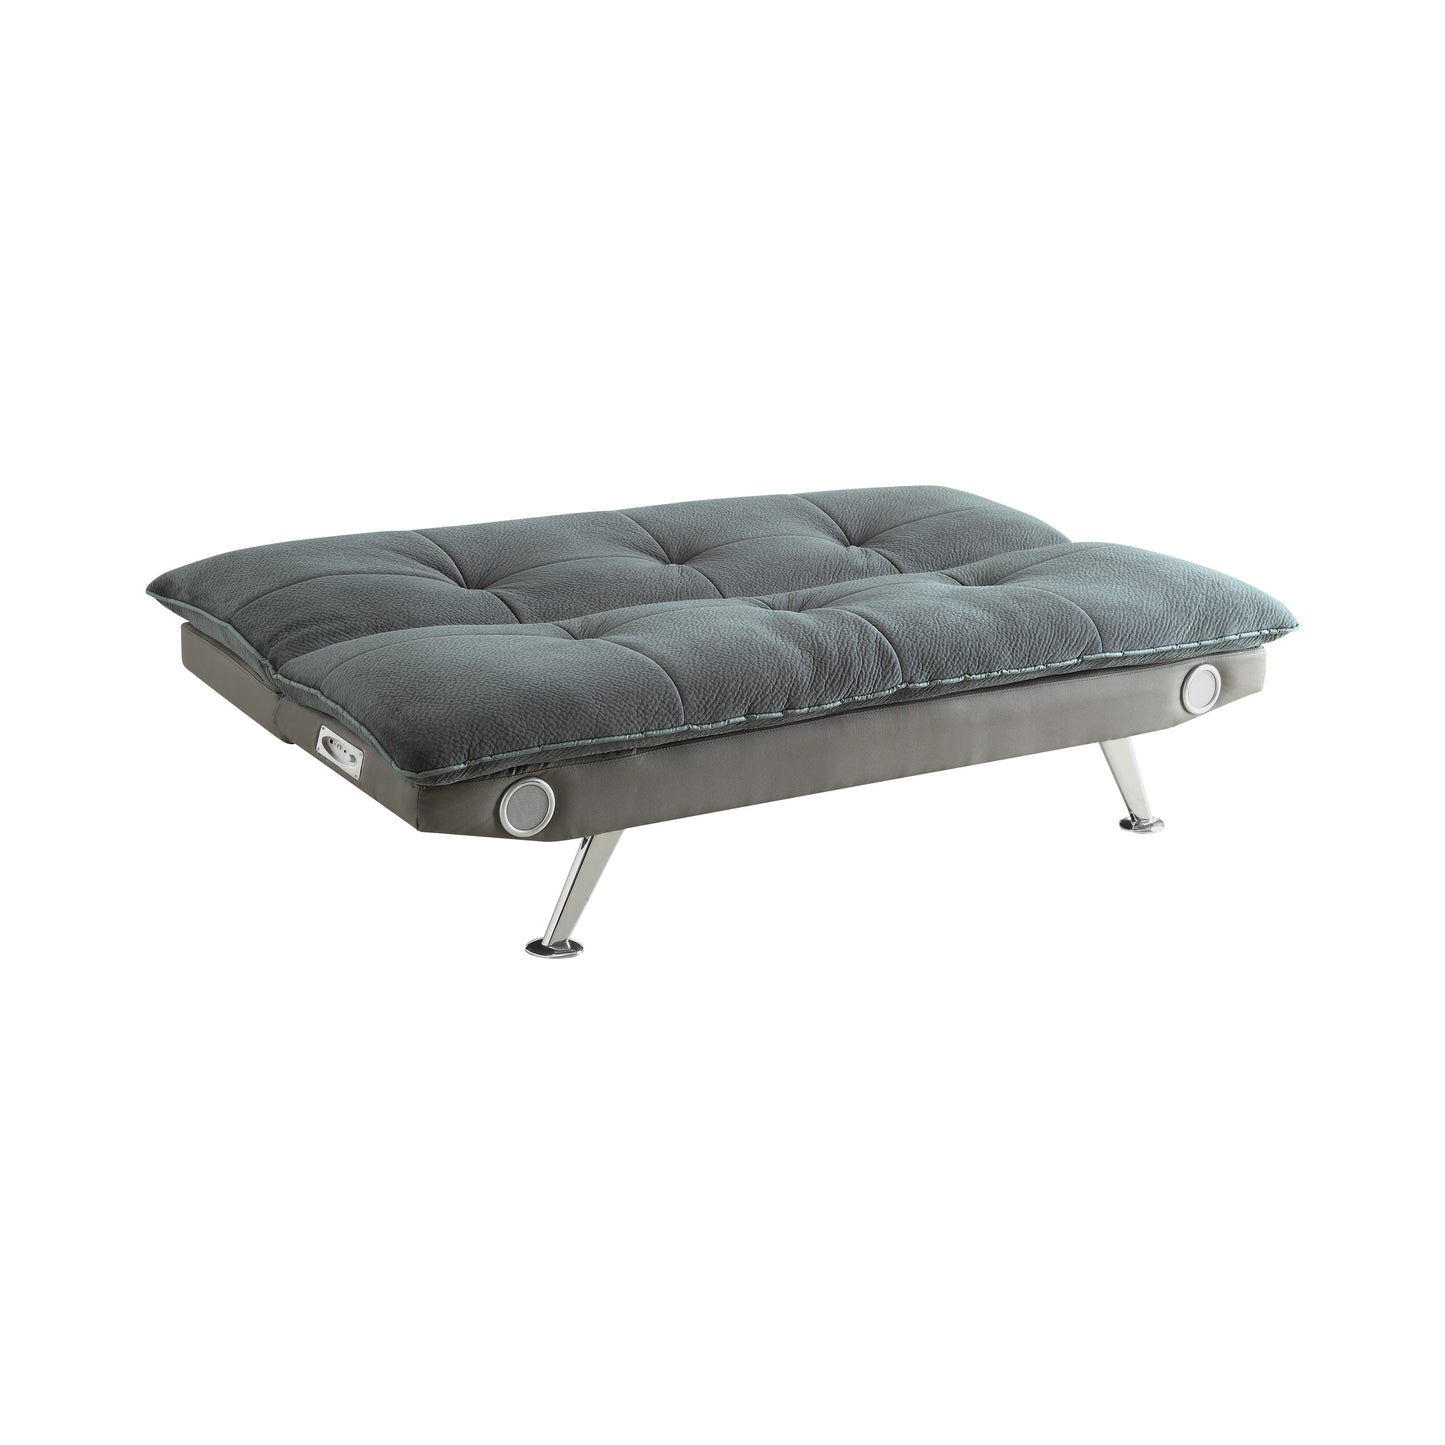 Odel Upholstered Sofa Bed with Bluetooth Speakers Grey